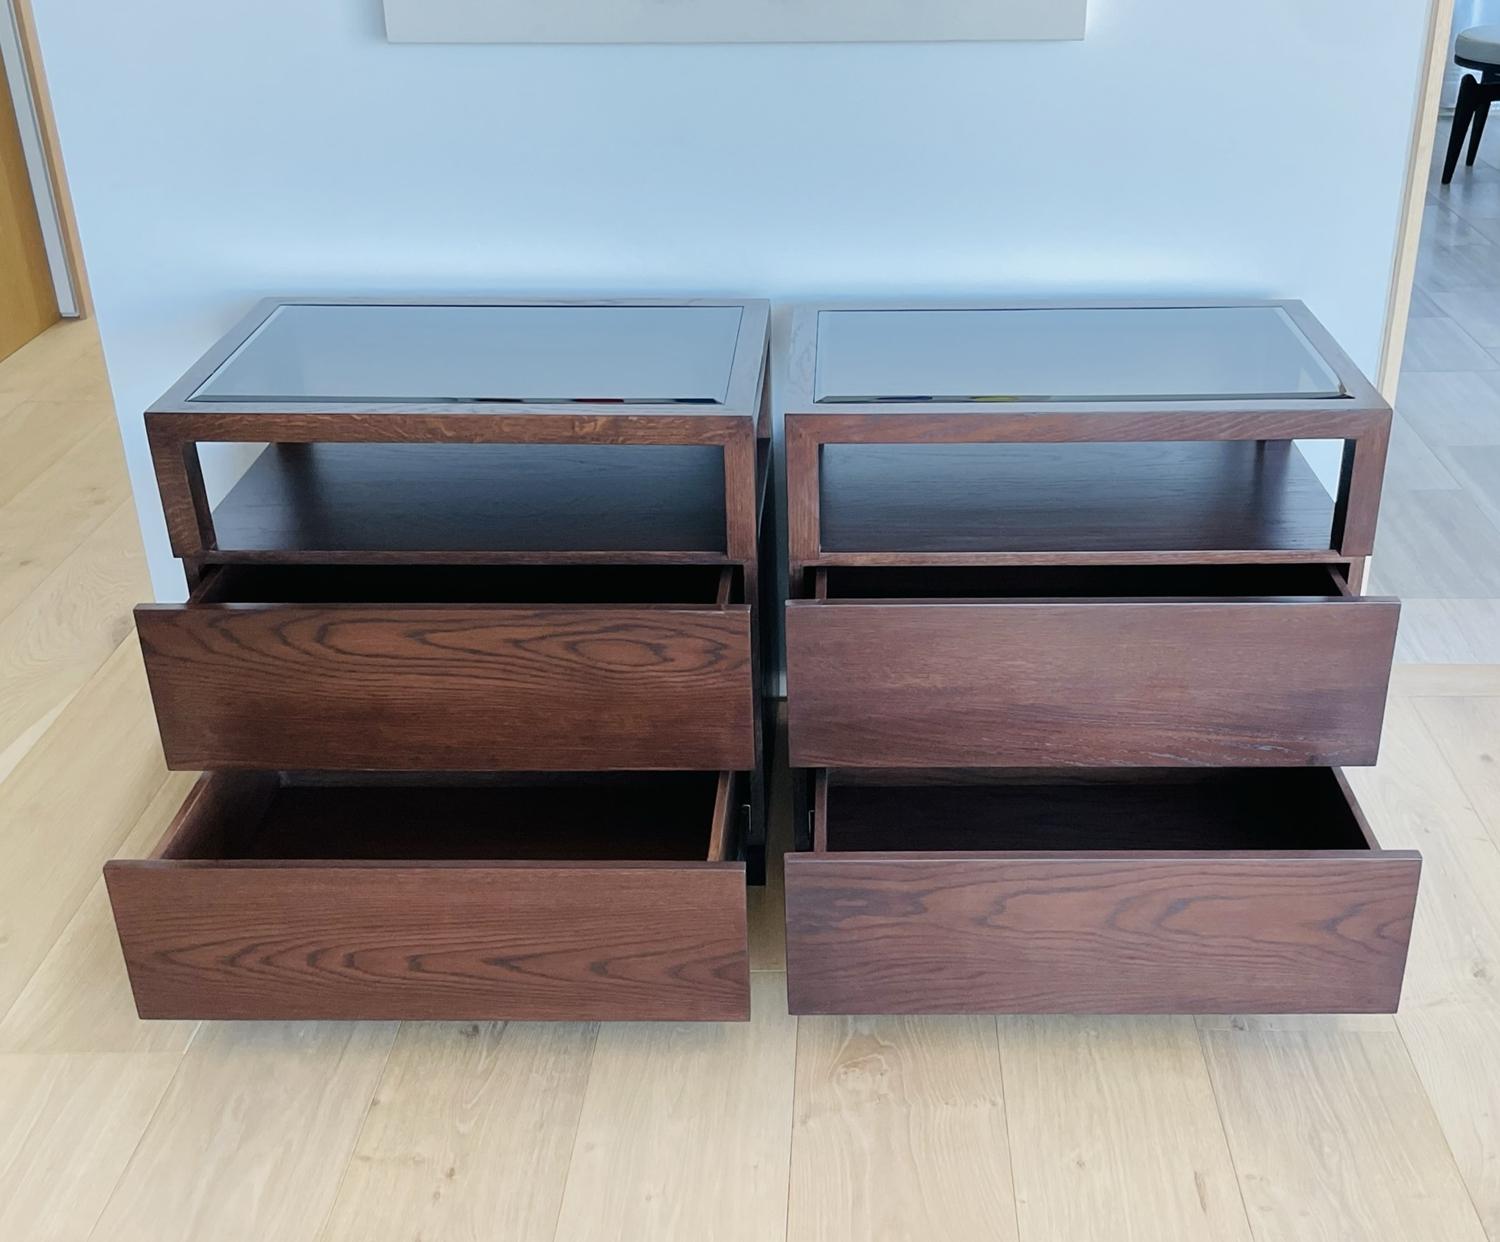 Pair of Nightstands by Cain Modern Made in Solid Oak and Bronzed Lucite For Sale 5